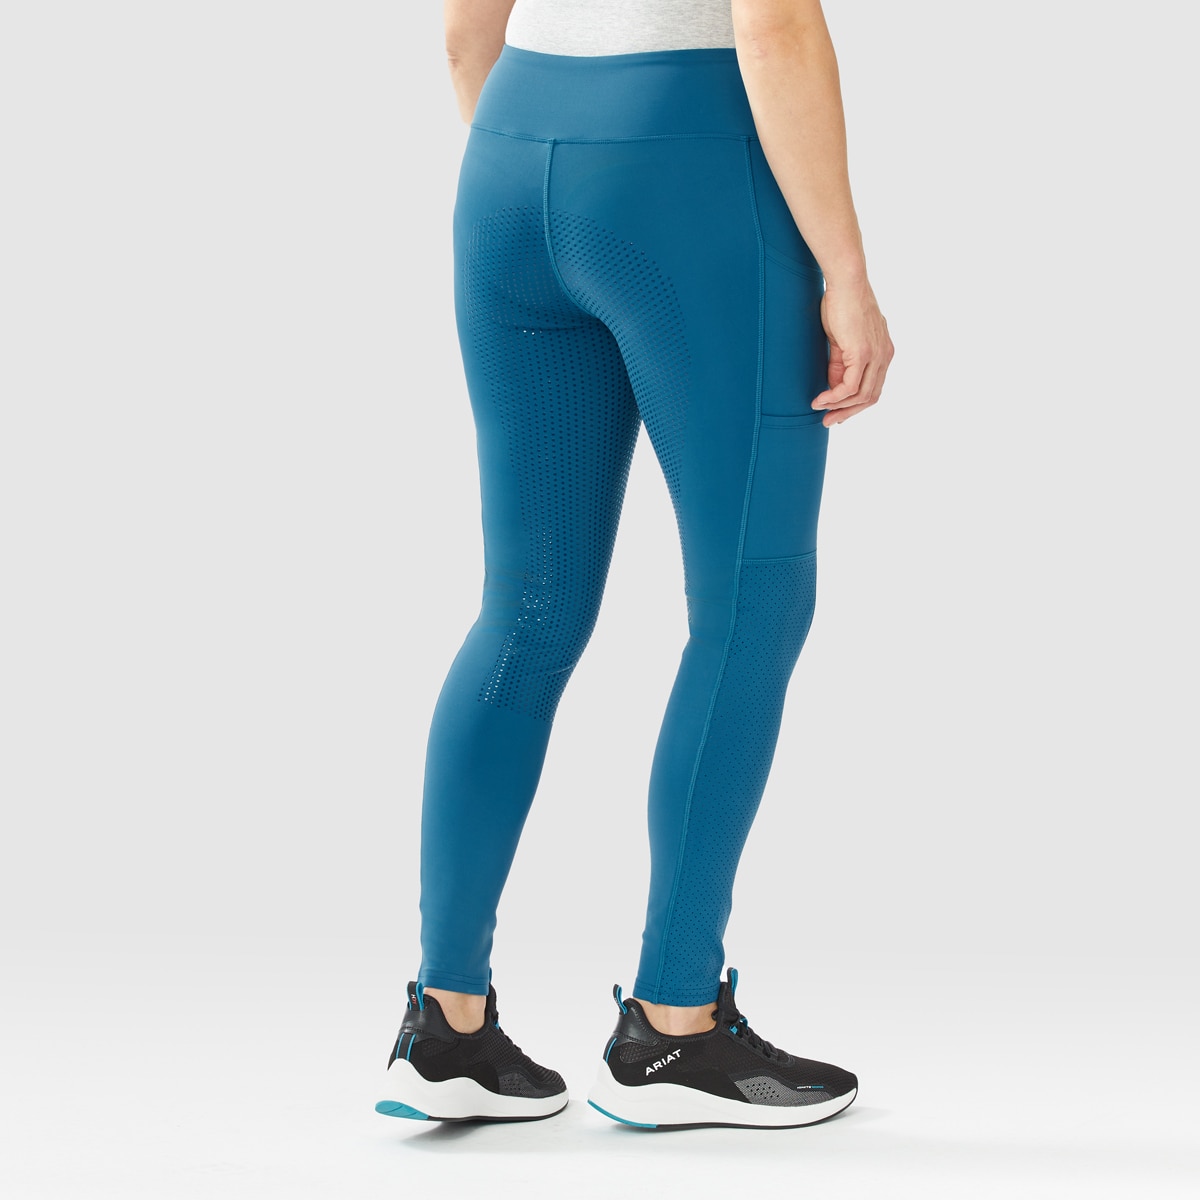 Piper Extended Silicone Grip Tights - Clearance!